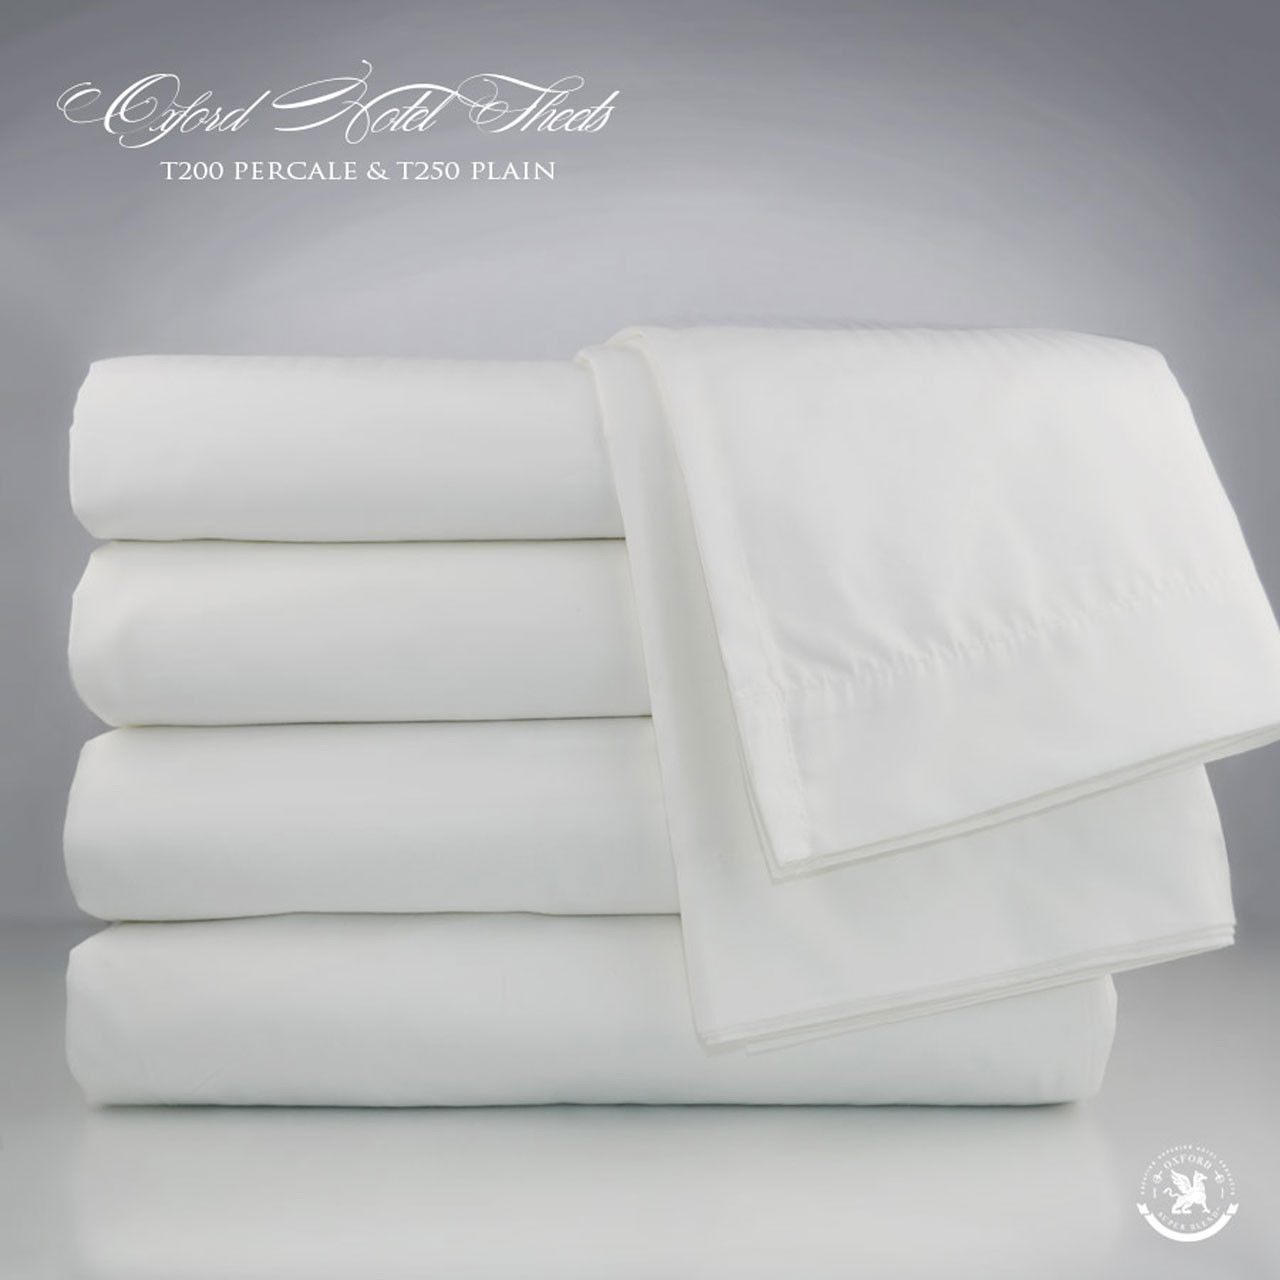 Can you list the unique feature of the Oxford Superblend pillowcase in the Oxford Super Blend sheets?